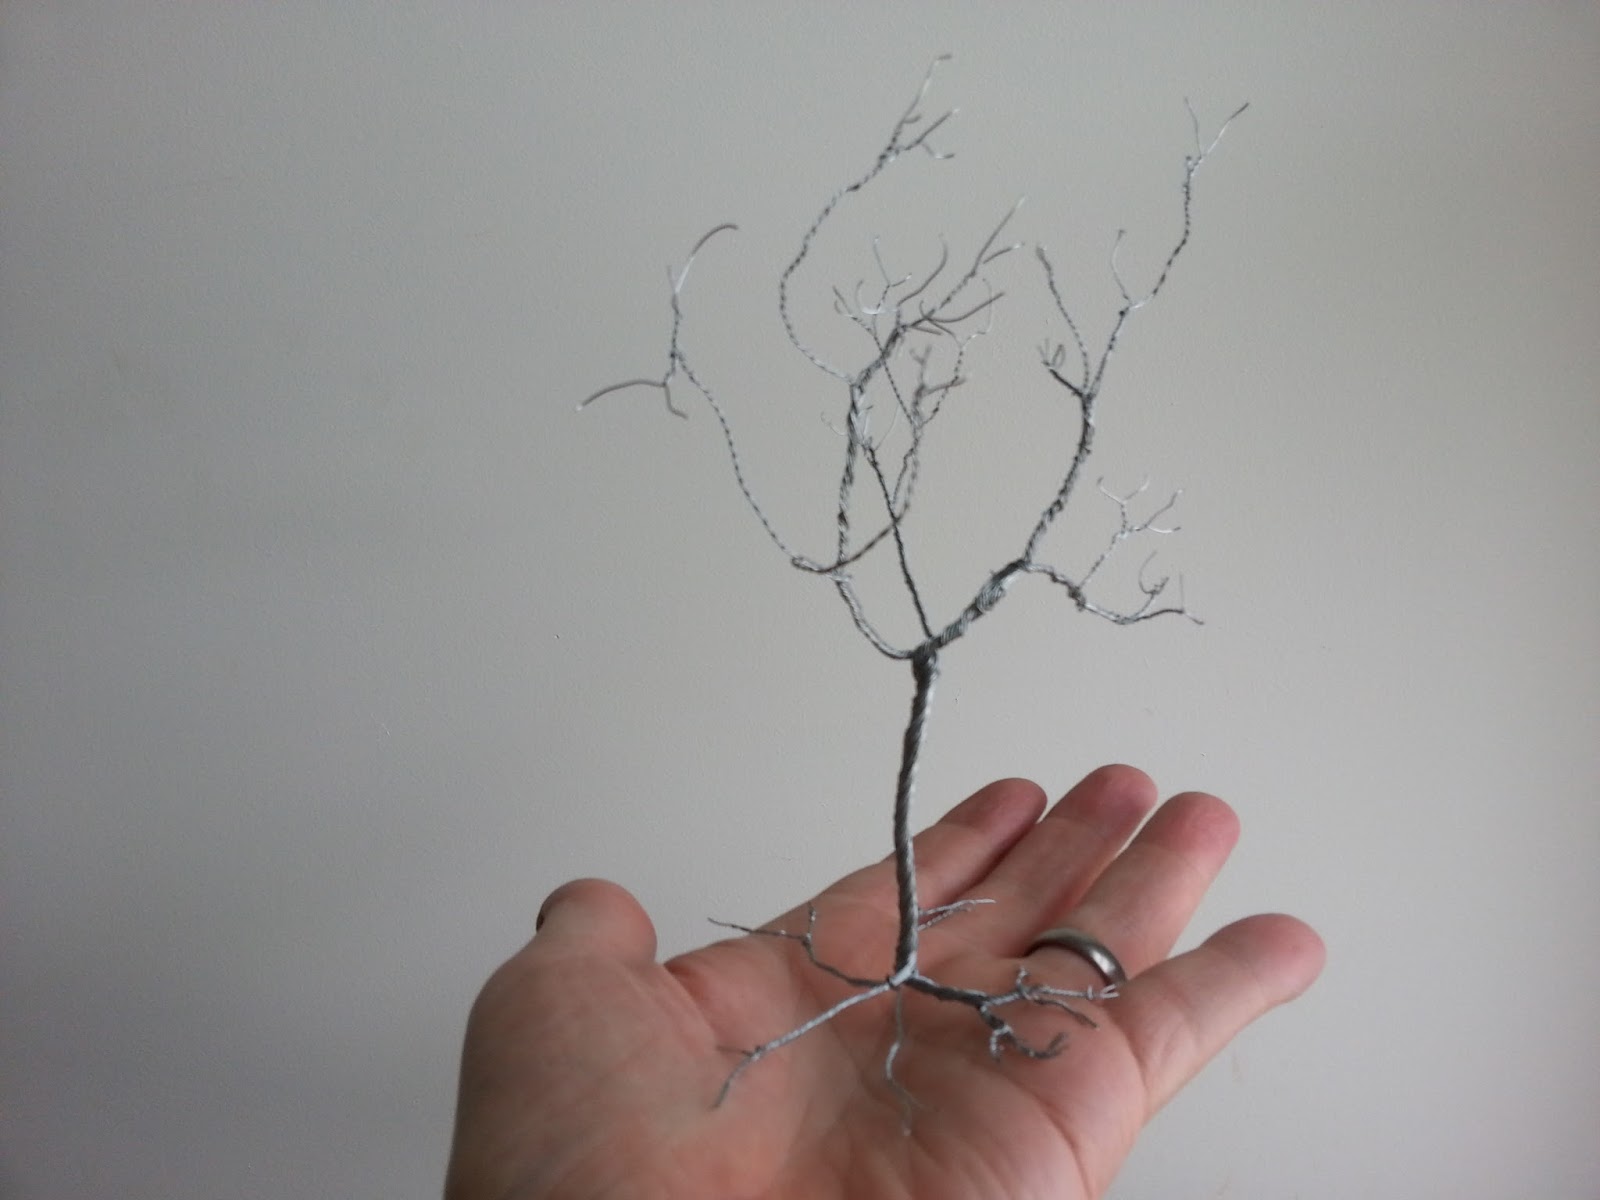 HOW TO CREATE REALISTIC TREES FOR YOUR DIORAMA (and with natural